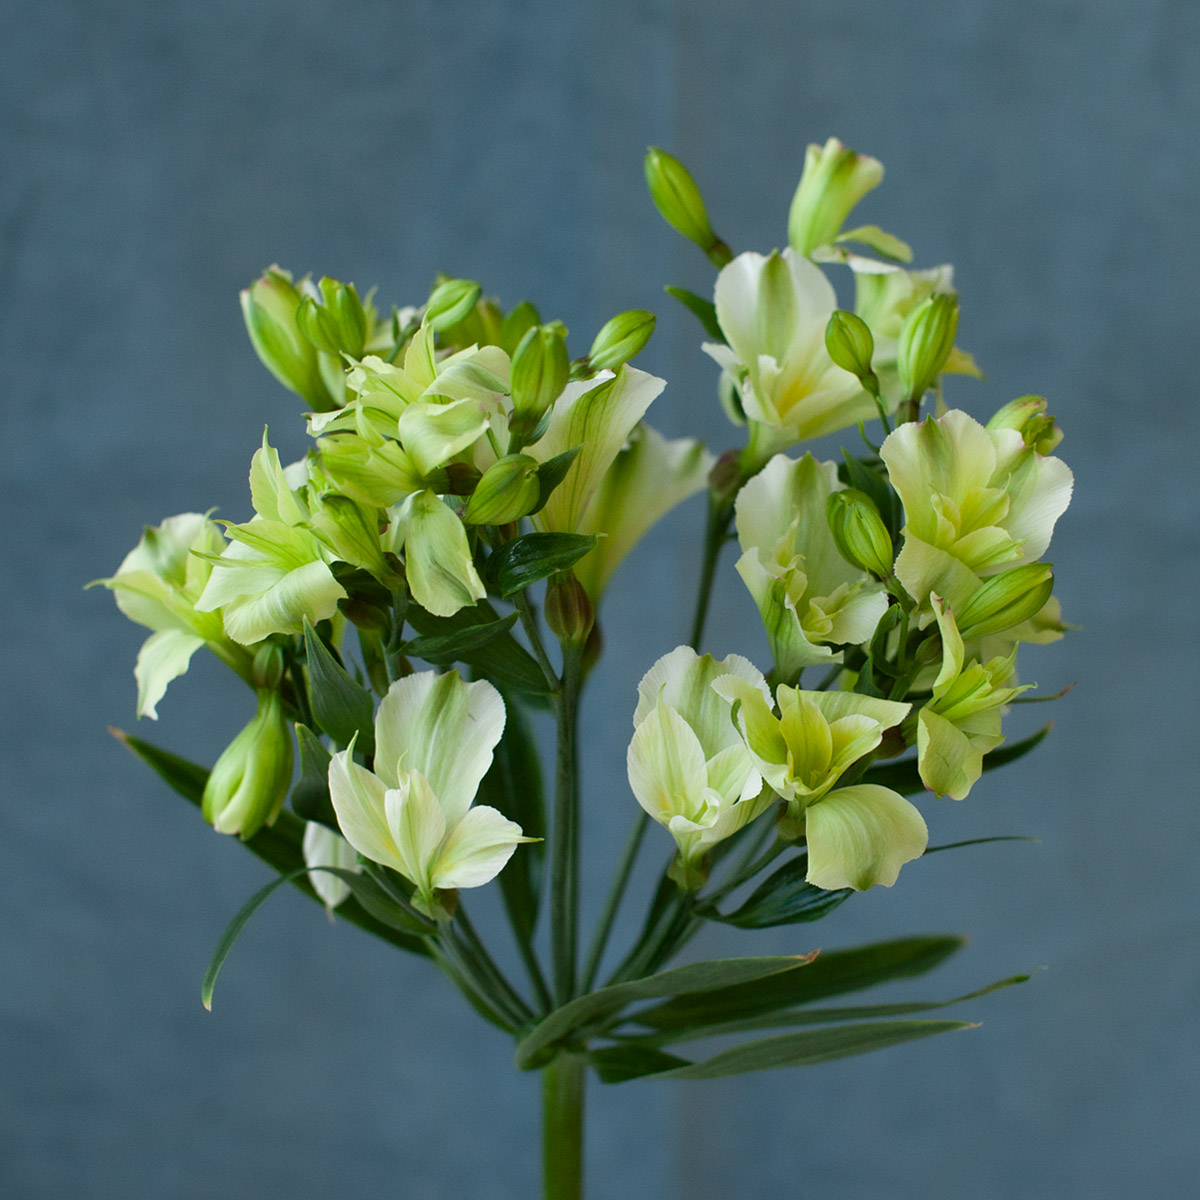 the-alstroemeria-florinca-line-has-a-new-minty-green-member-featured